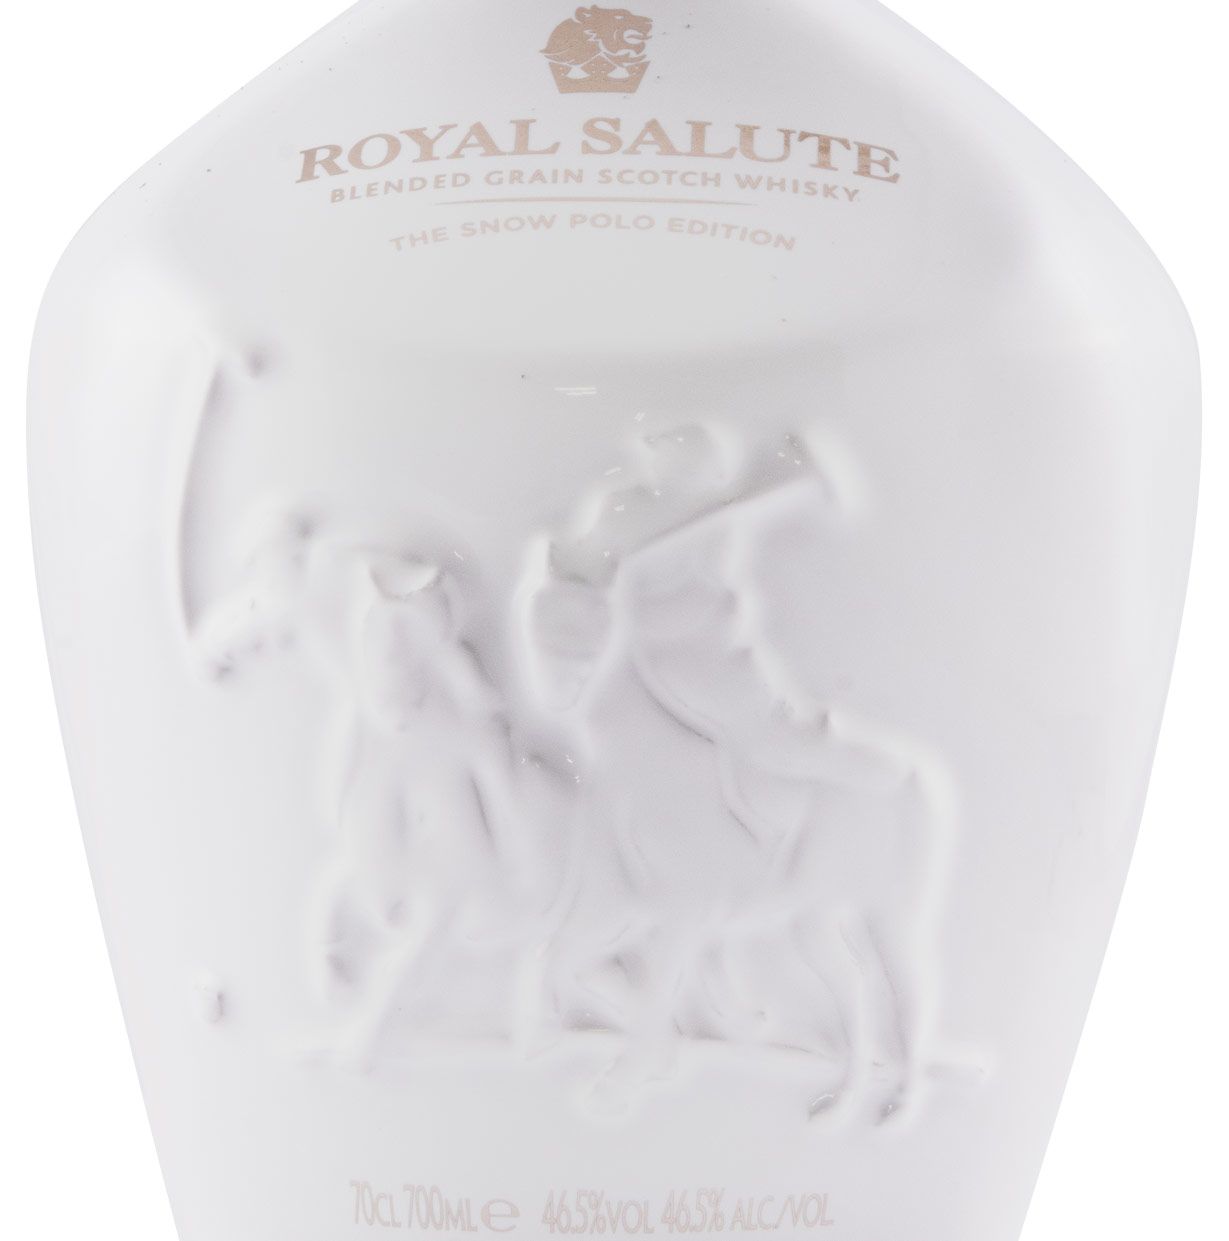 Royal Salute The Snow Polo Edition 21 years